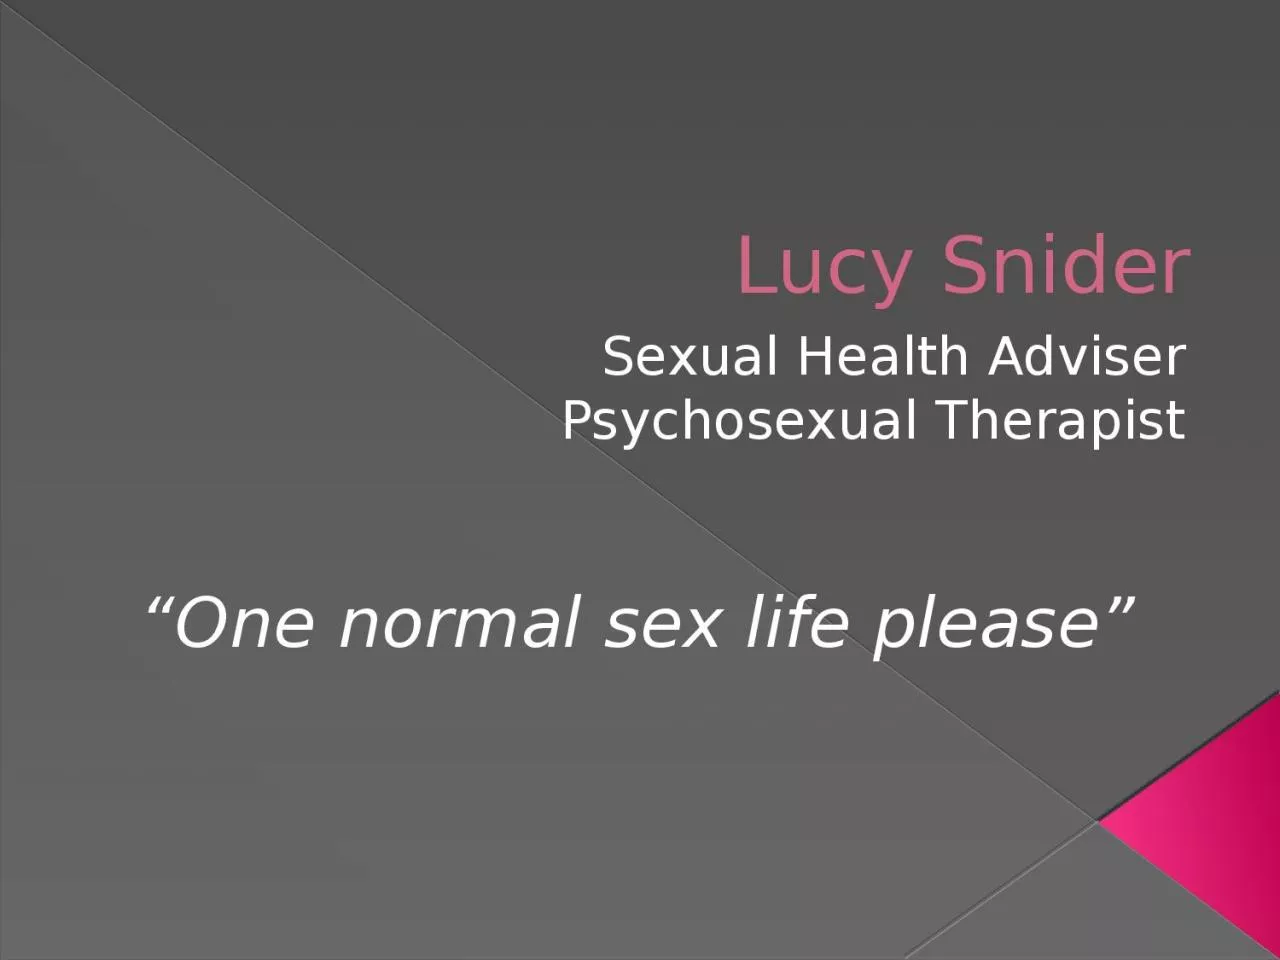 Lucy Snider Sexual Health Adviser